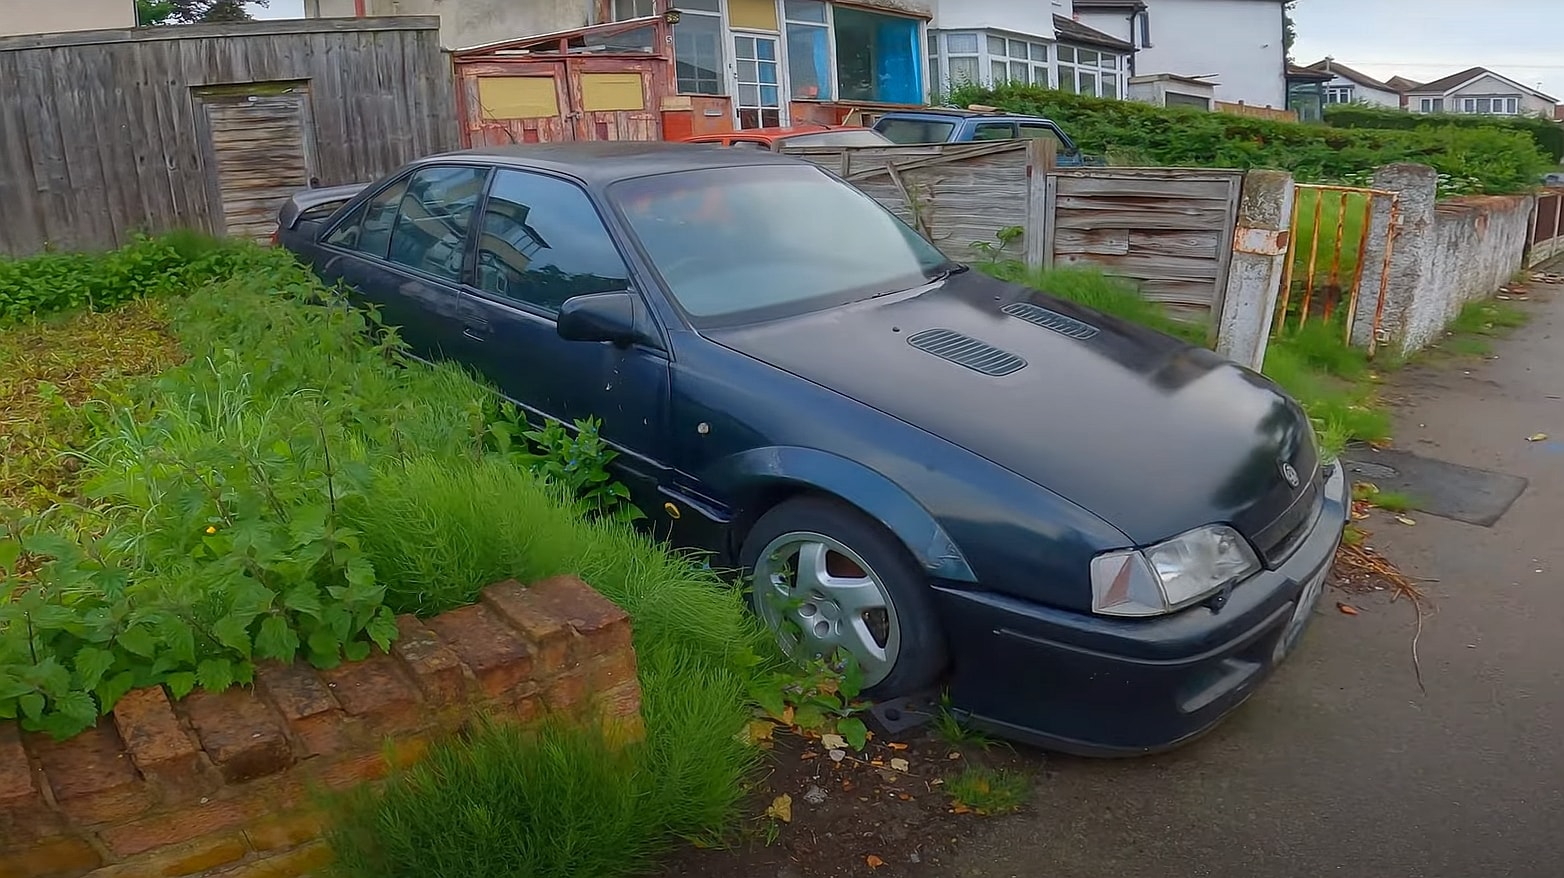 Read more about the article Lotus Carlton abandoned for 30 years is an unlikely find on a farm